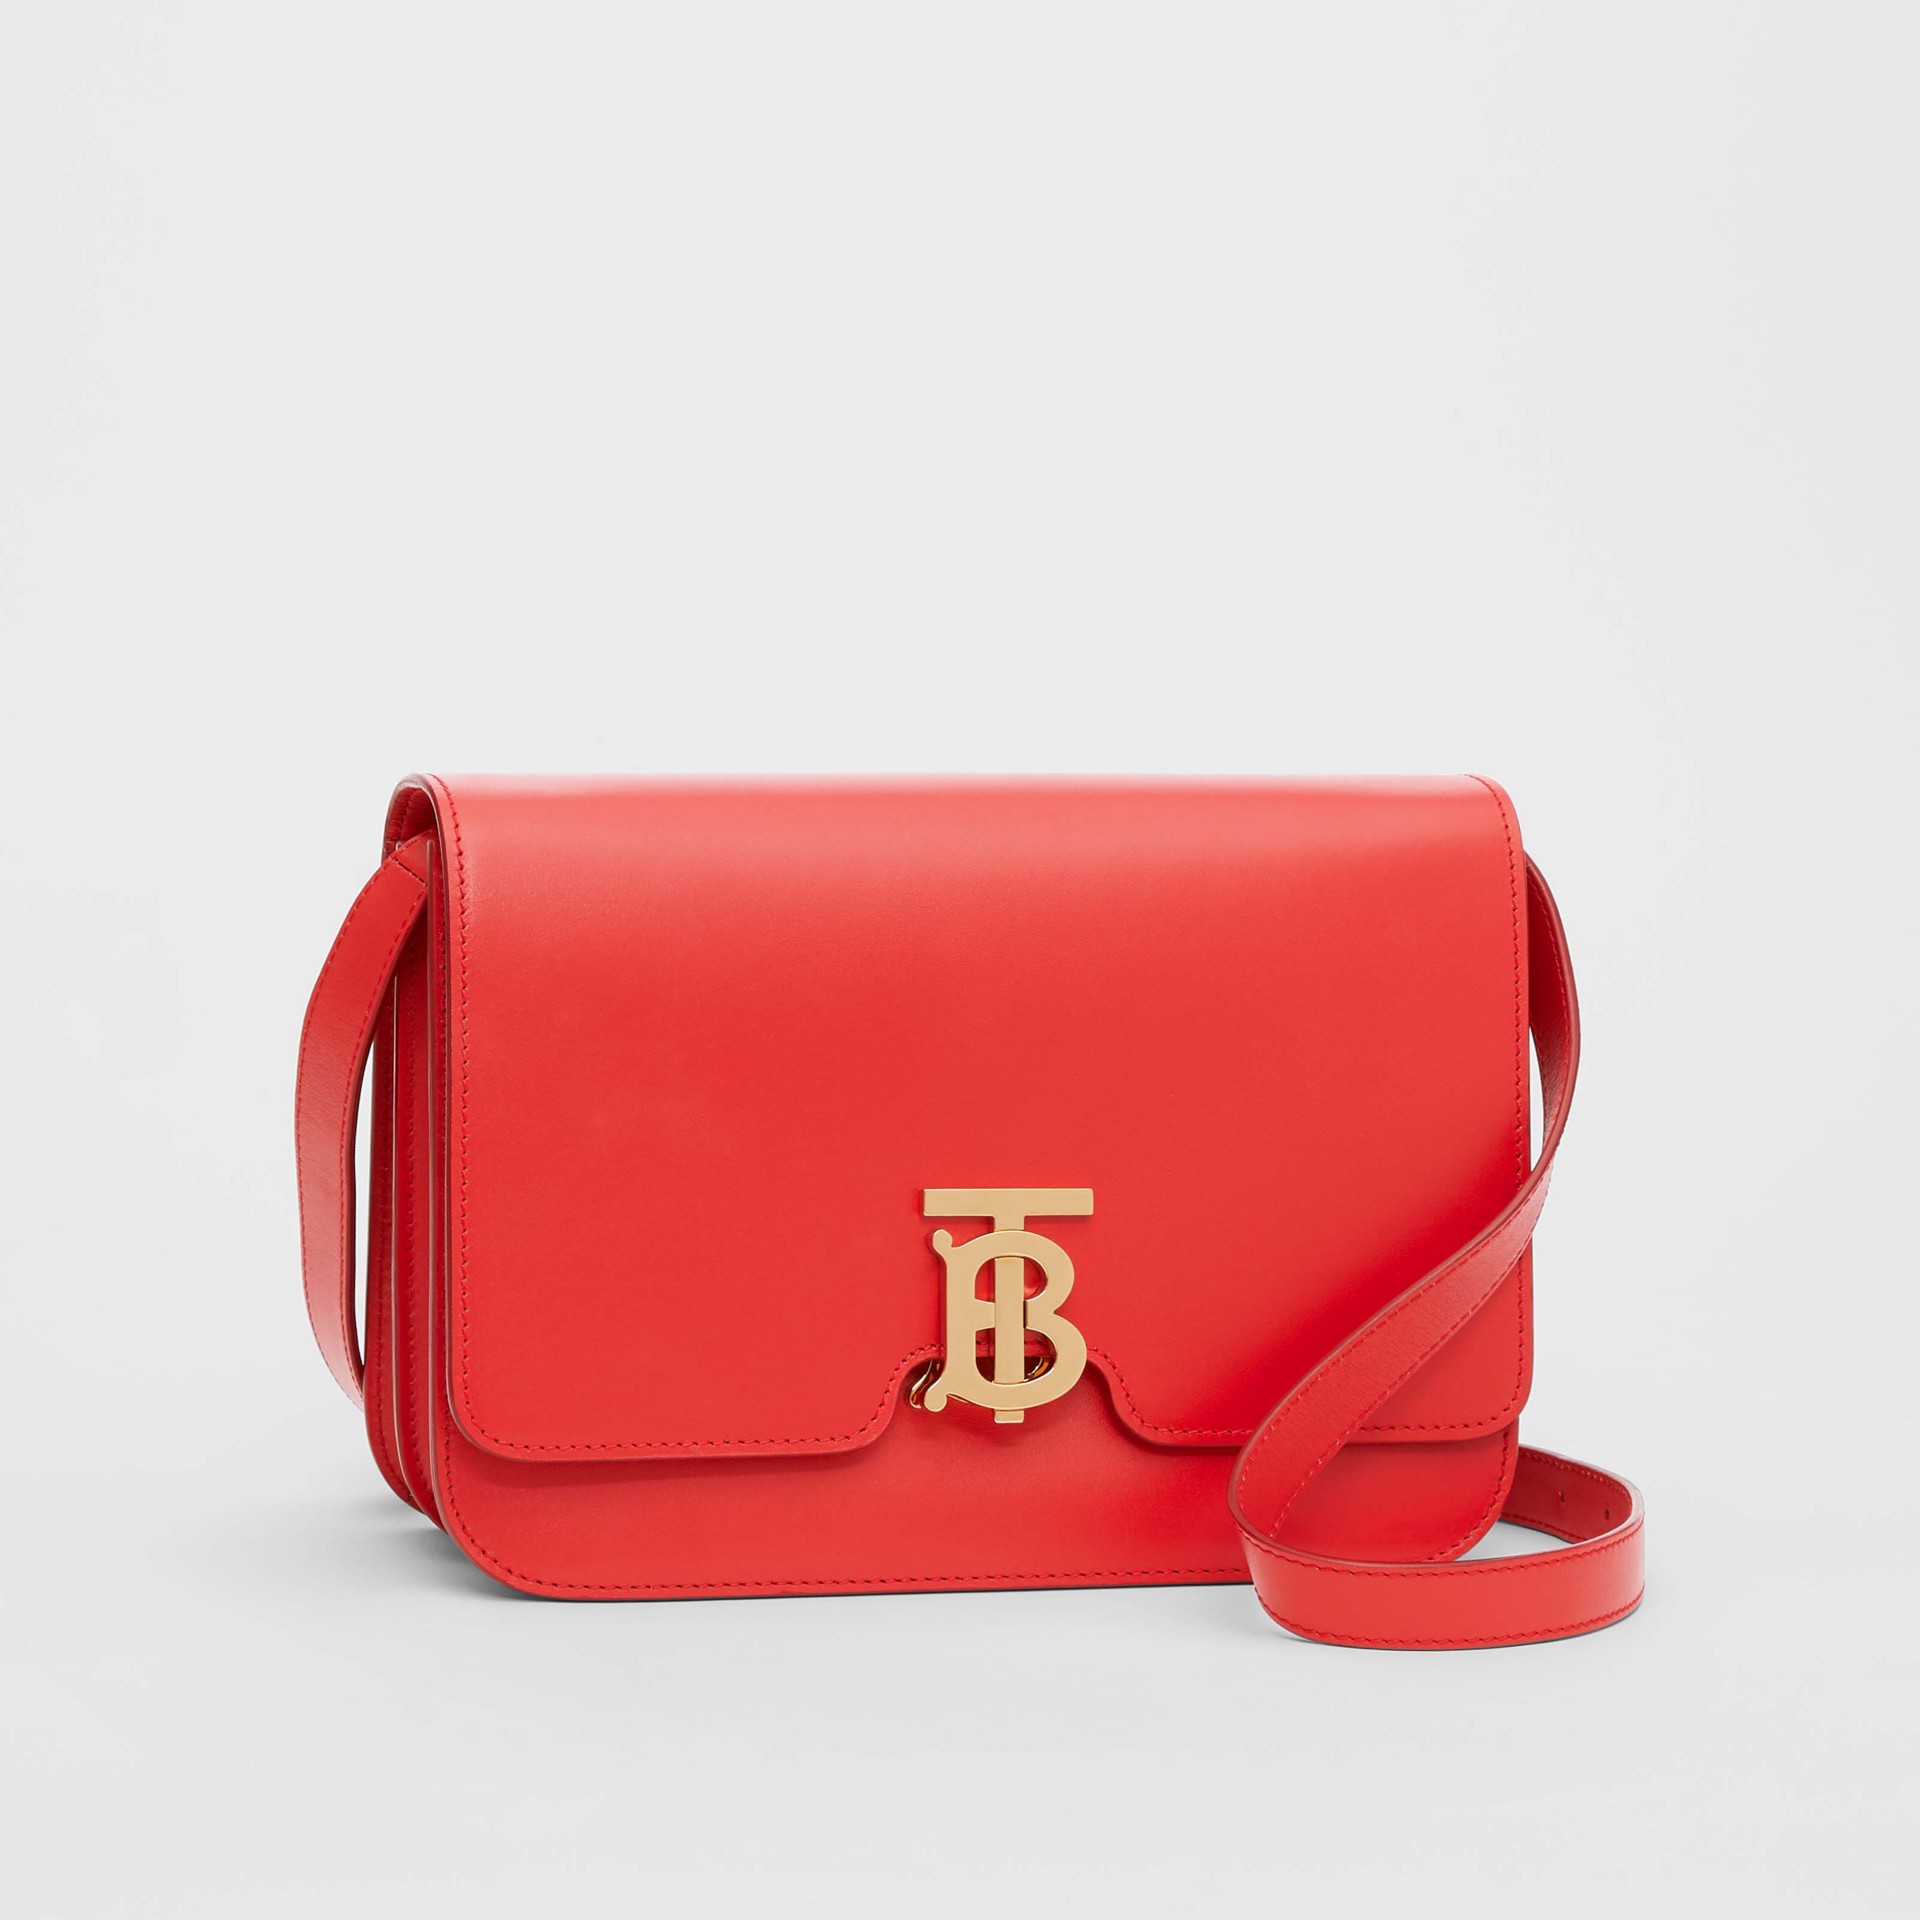 Medium Leather TB Bag in Bright Red - Women | Burberry United States